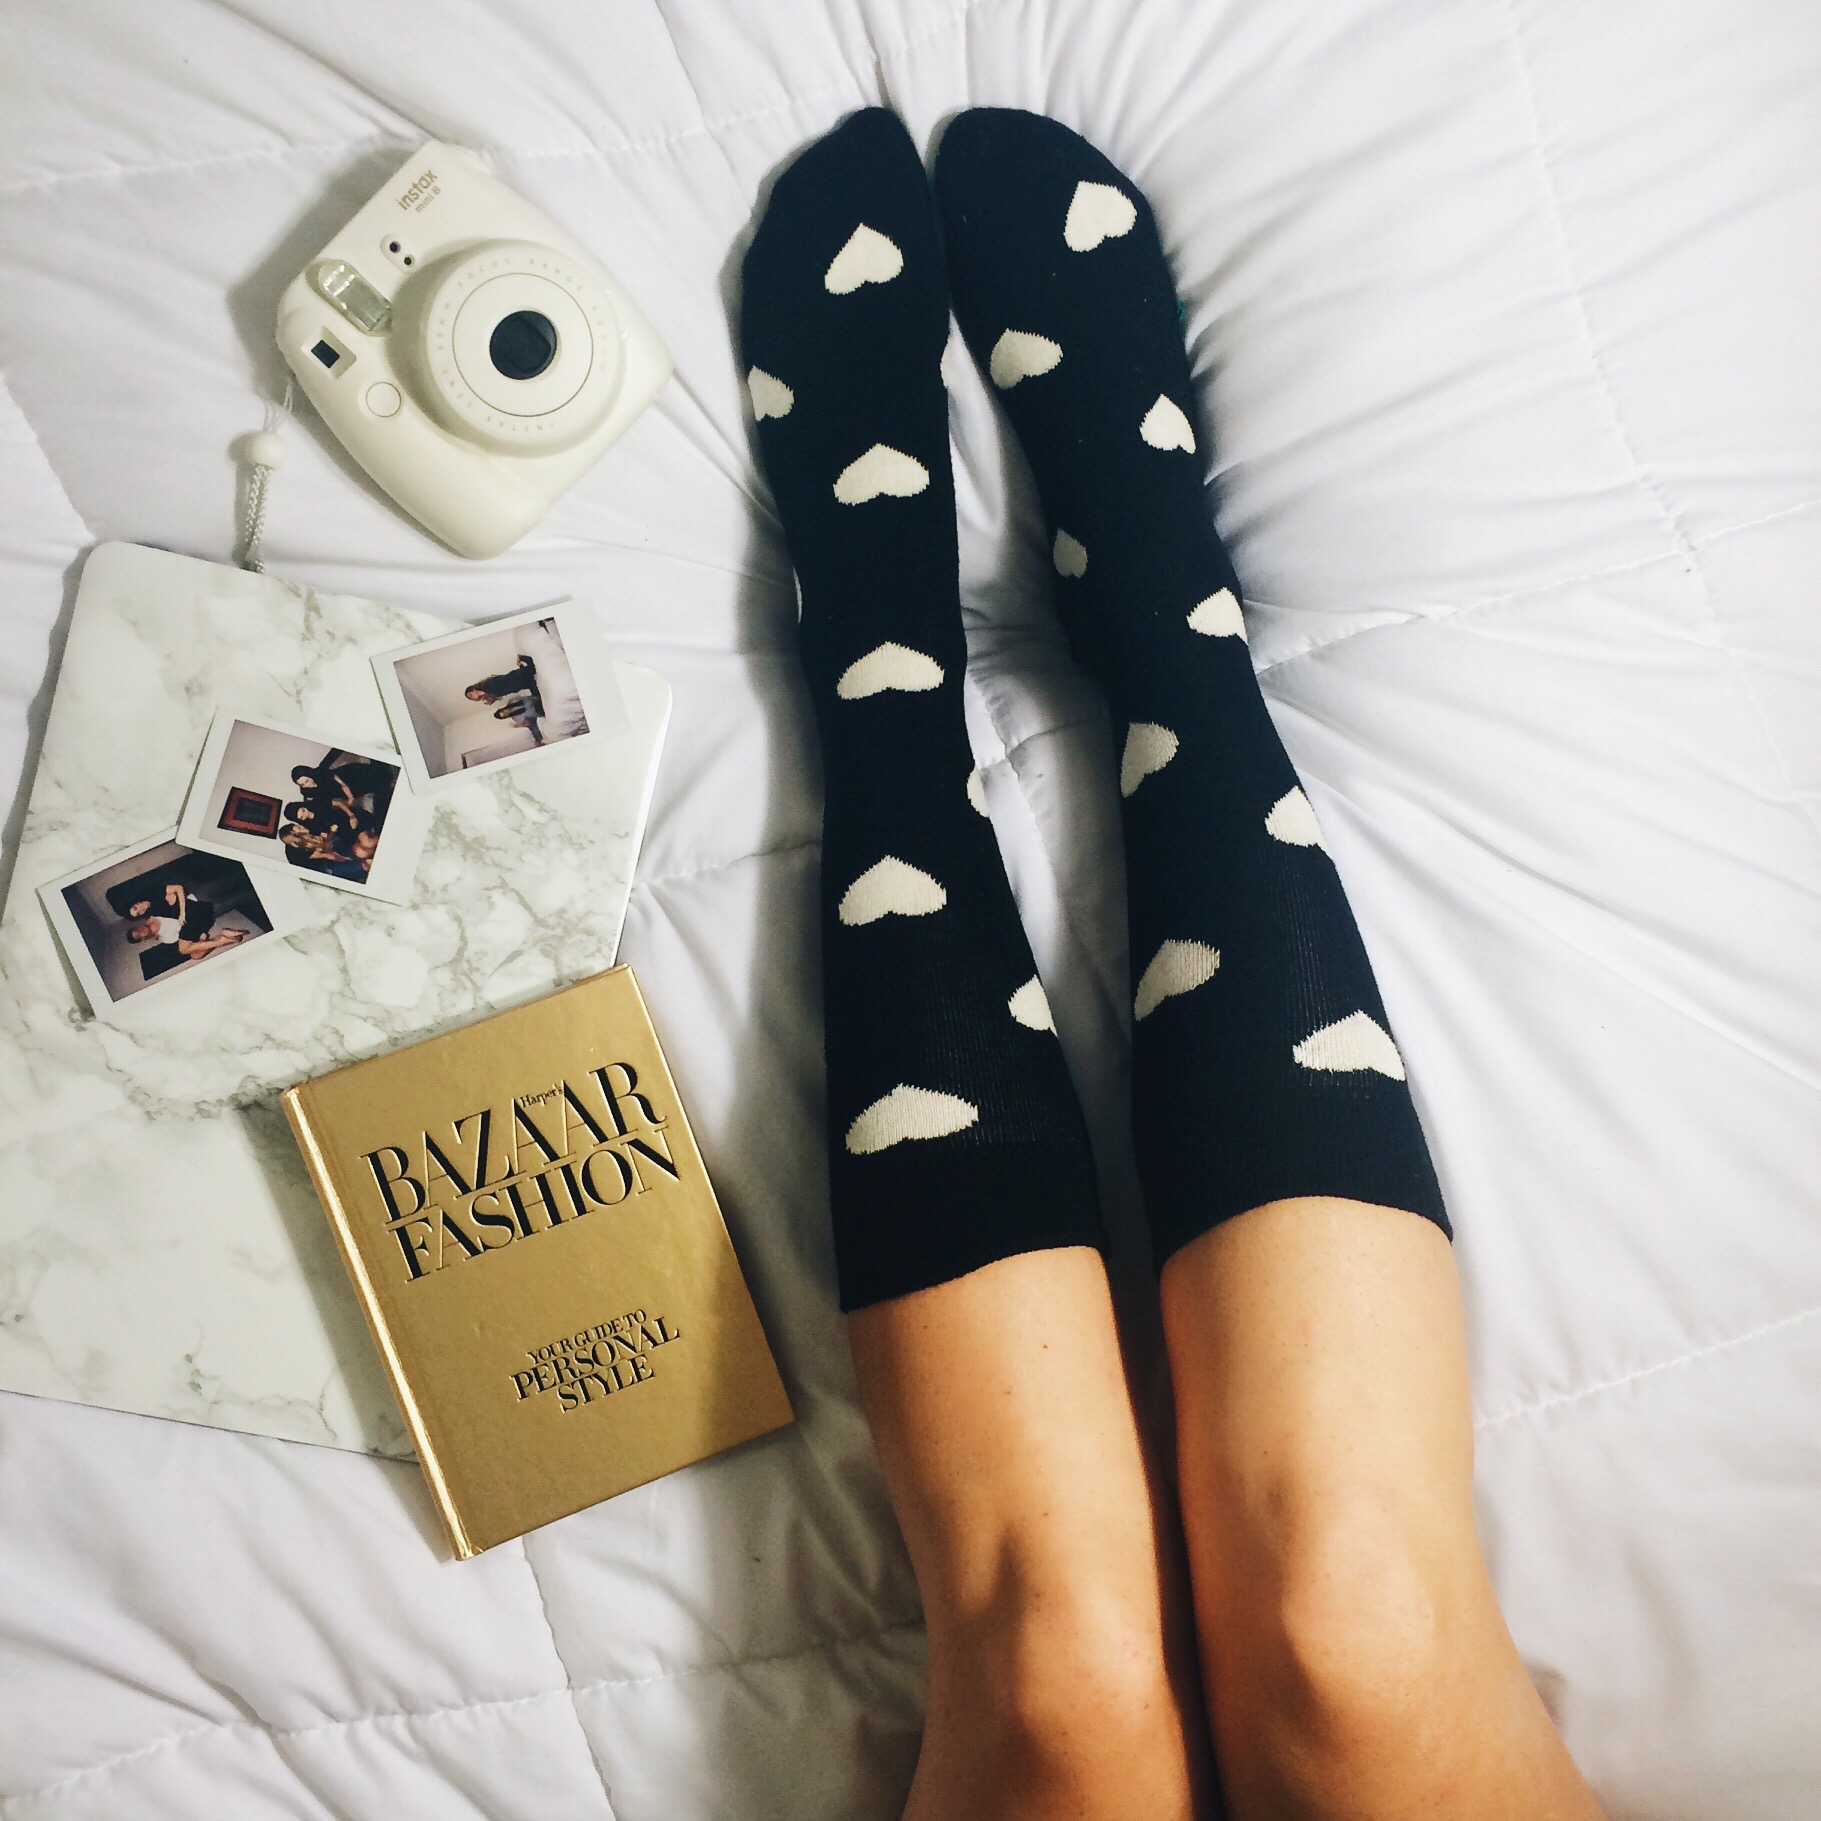 Lazy Days in Happy Socks Louboutins & Love Fashion Blog Esther Santer NYC Street Style Blogger Outfit Inspo Black White Hearts Pattern Print Poloroid Bed Legs Photo Flaylay Marble Macbook Laptop Girl Online Shopping Holiday Gift Collaboration Colorful.jpg